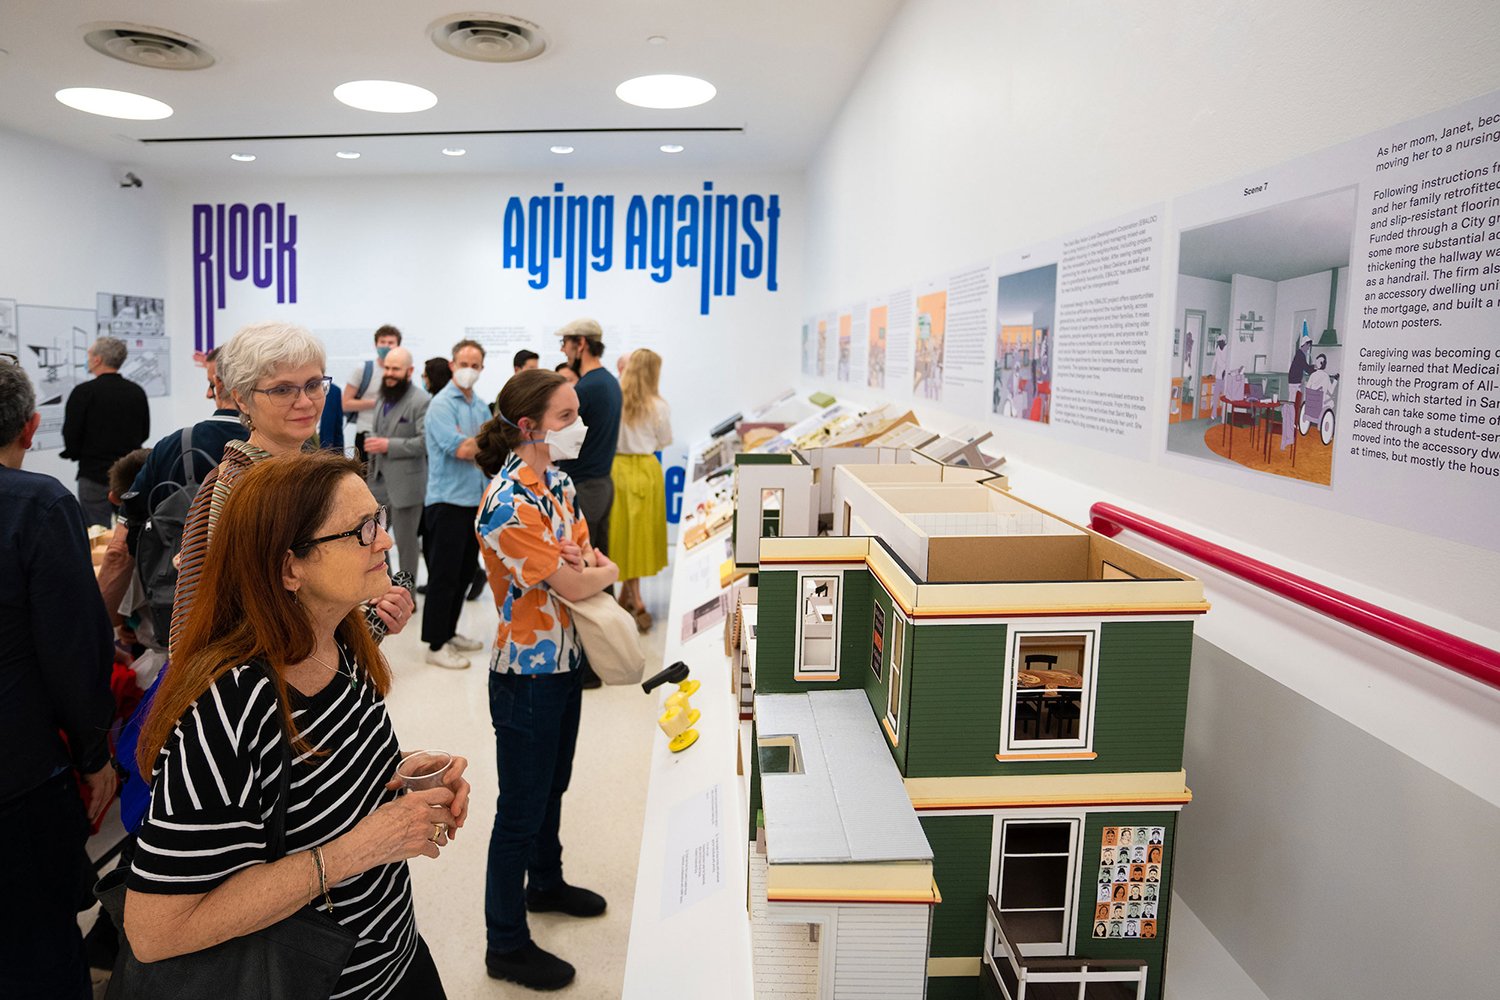 A crowd looks at architecture models and drawings in a gallery space.